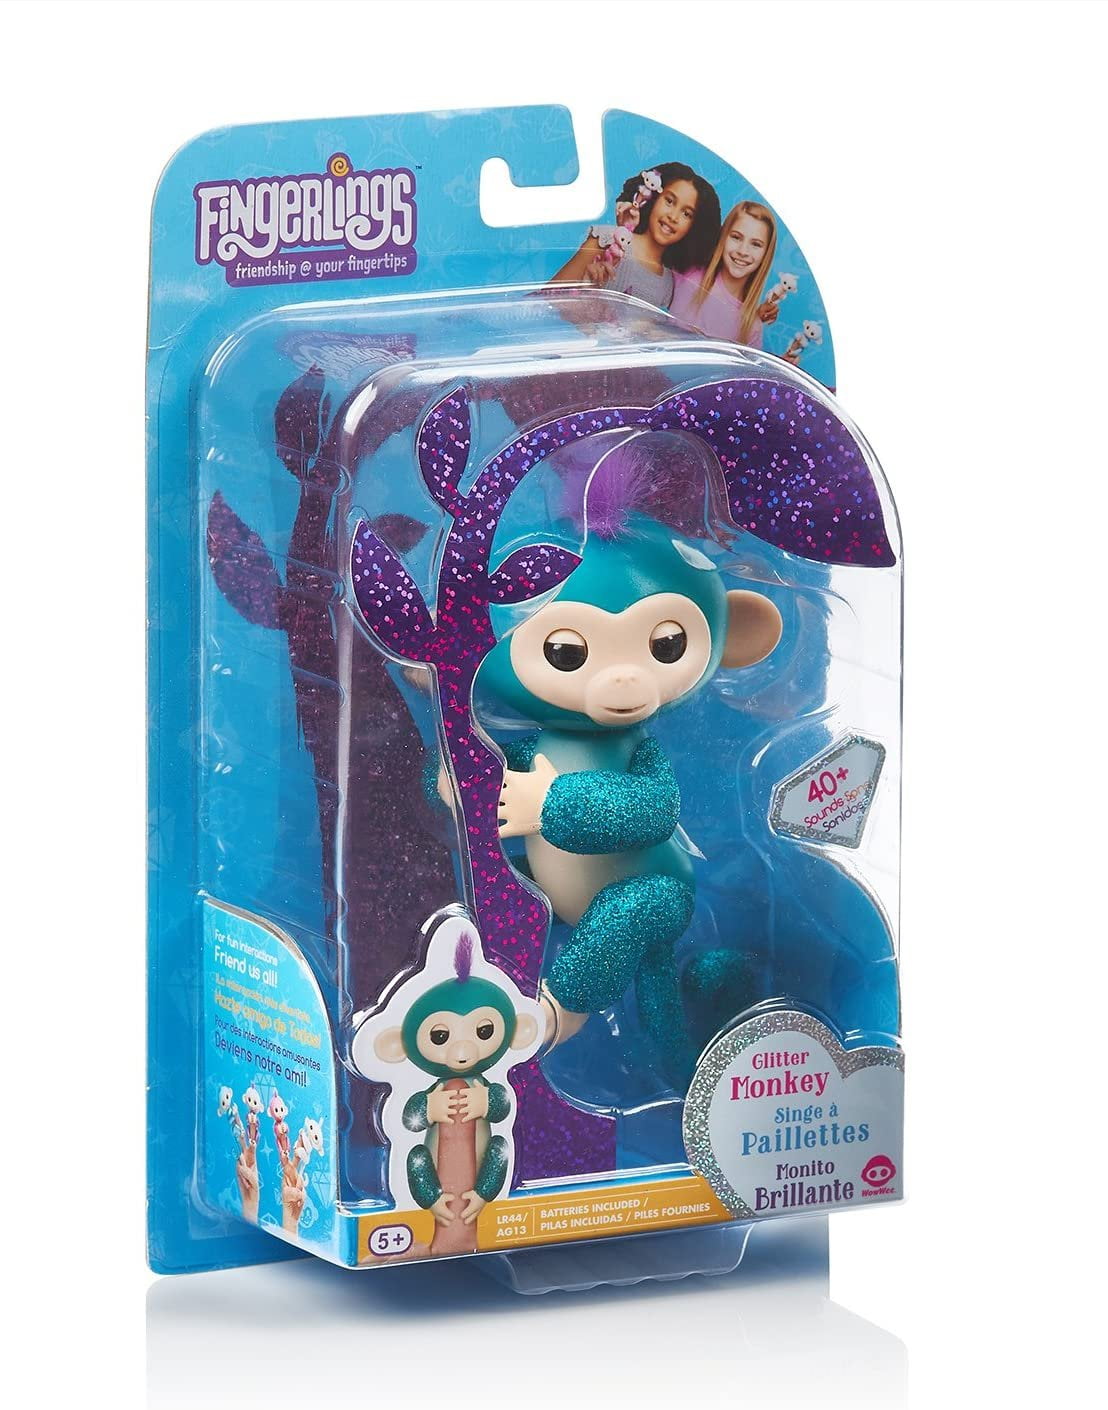 Fingerlings Liberty (Red, White & Blue Glitter) EXCLUSIVE